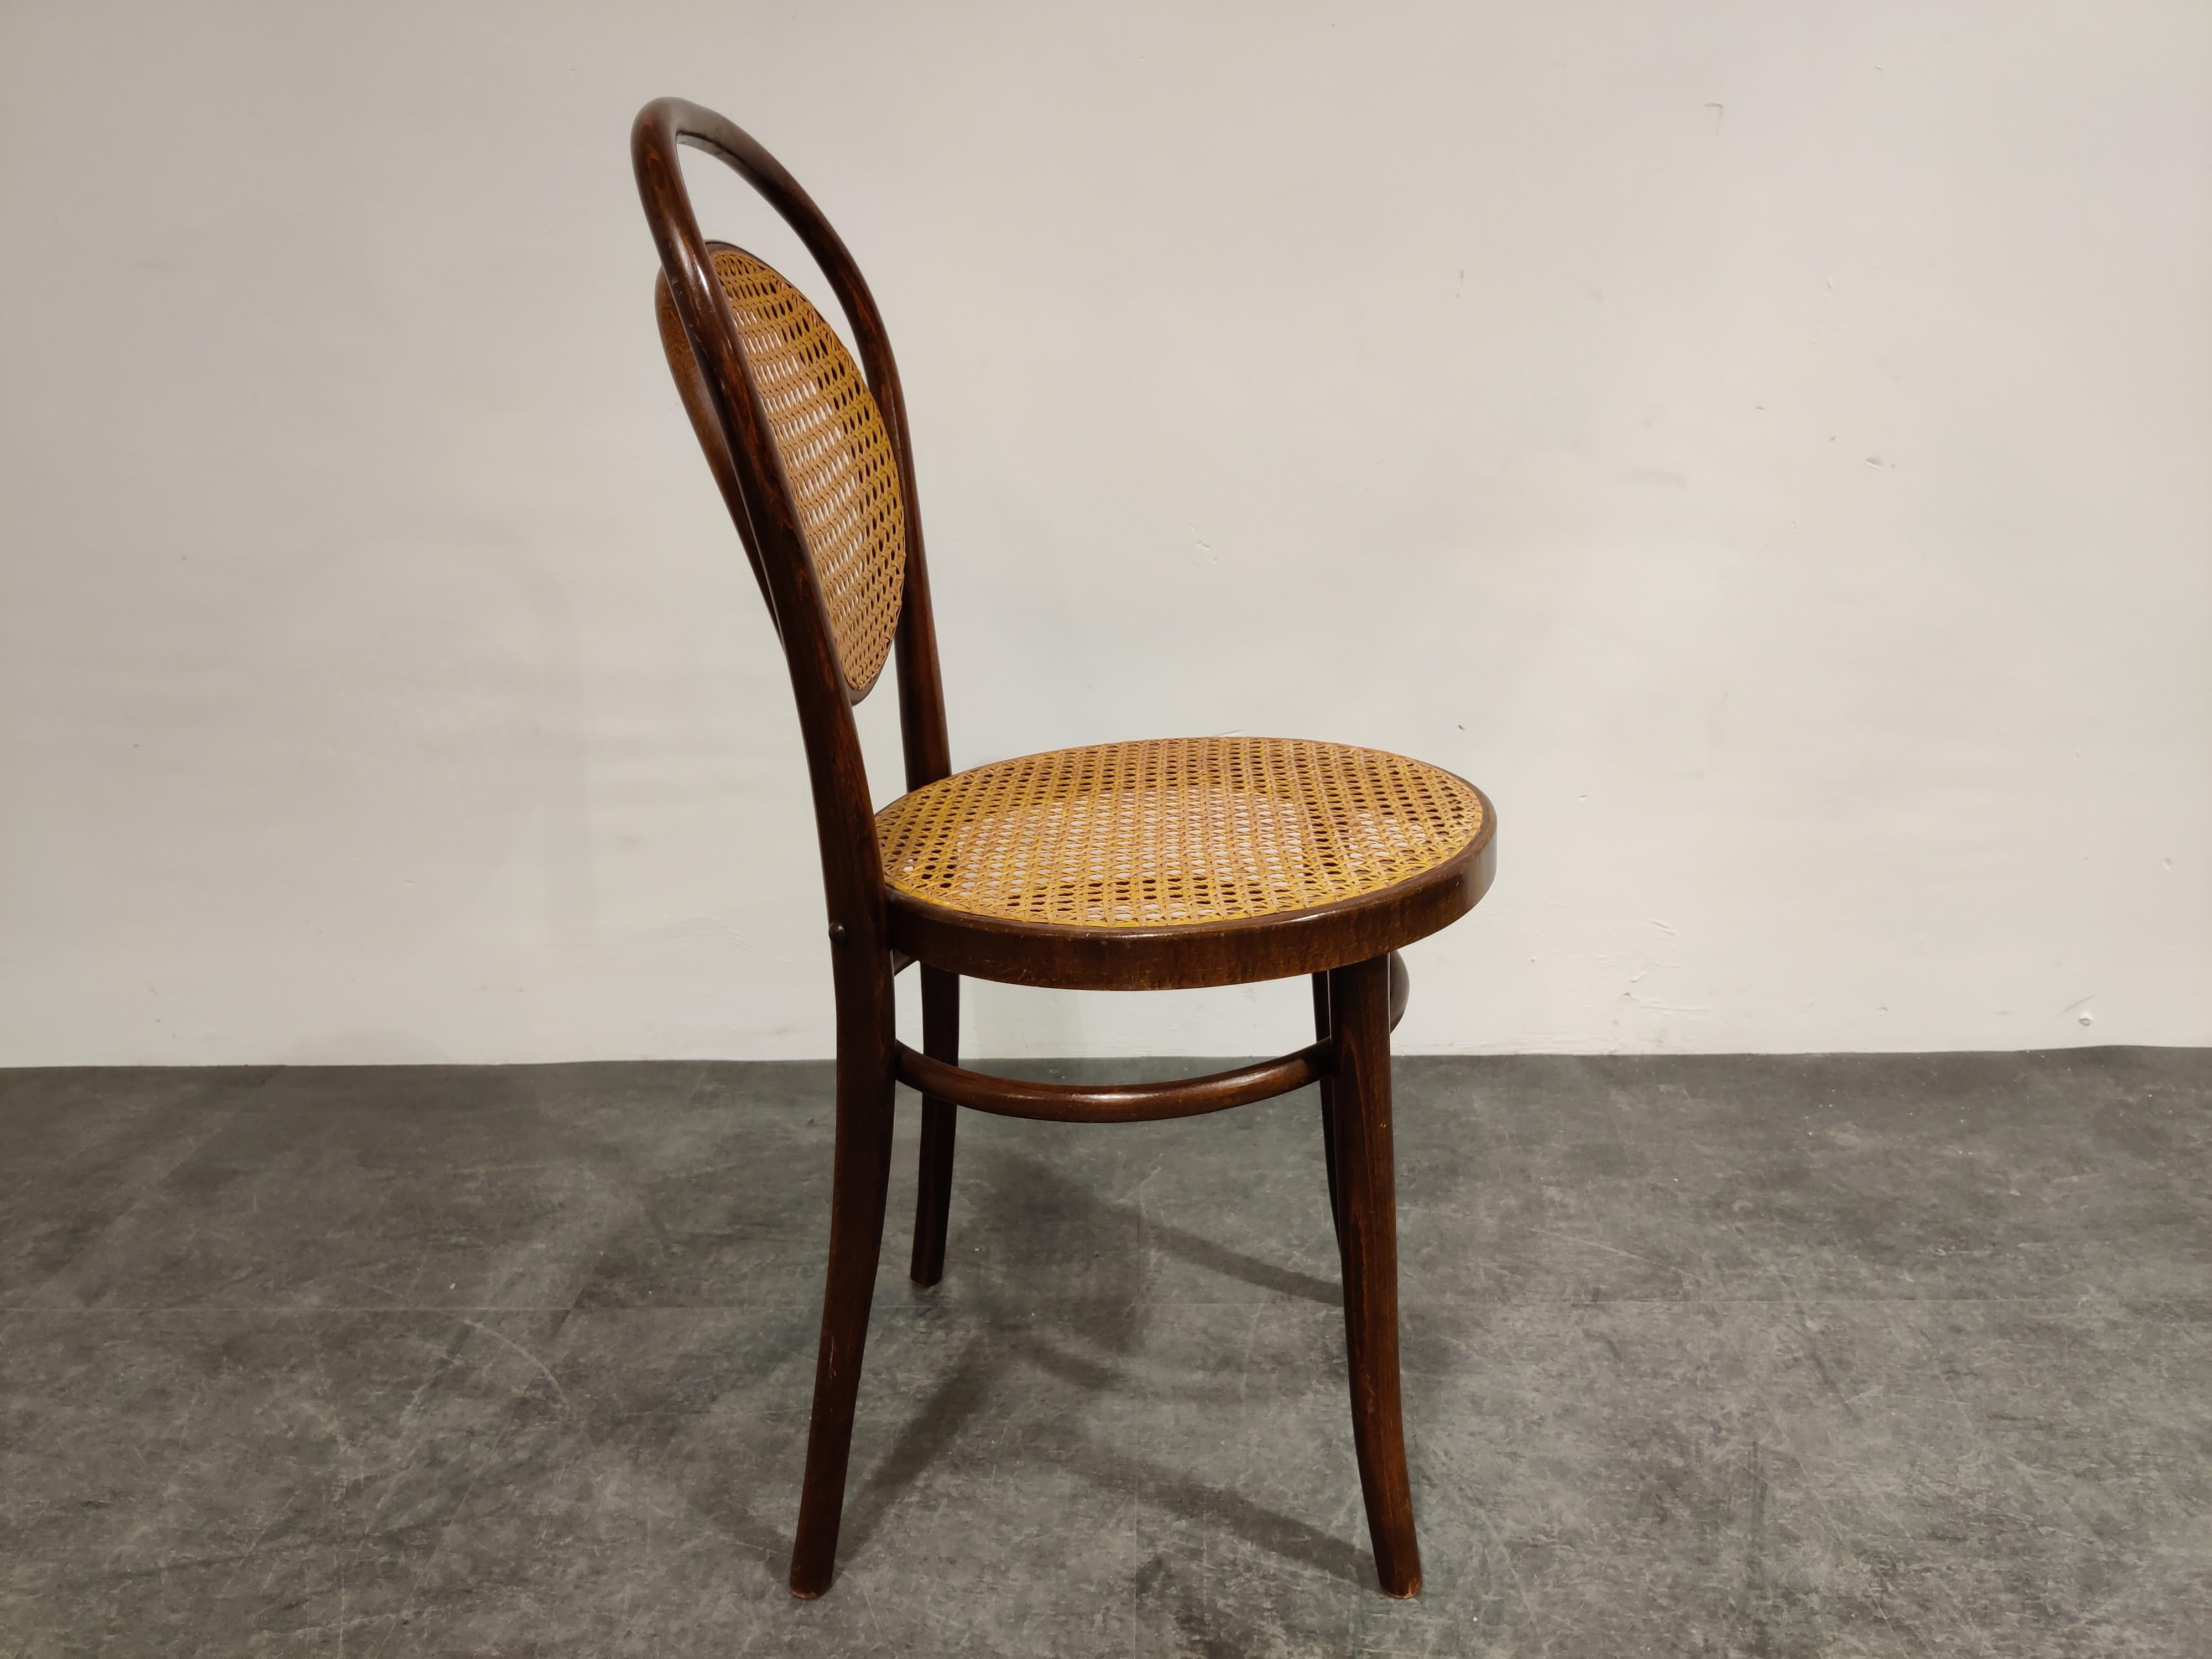 Dark brown bentwood dining chair.

Stamped 'made in Romania'. 

We date it at early 1950s.

Good condition

Dimensions:
Height 90cm/35